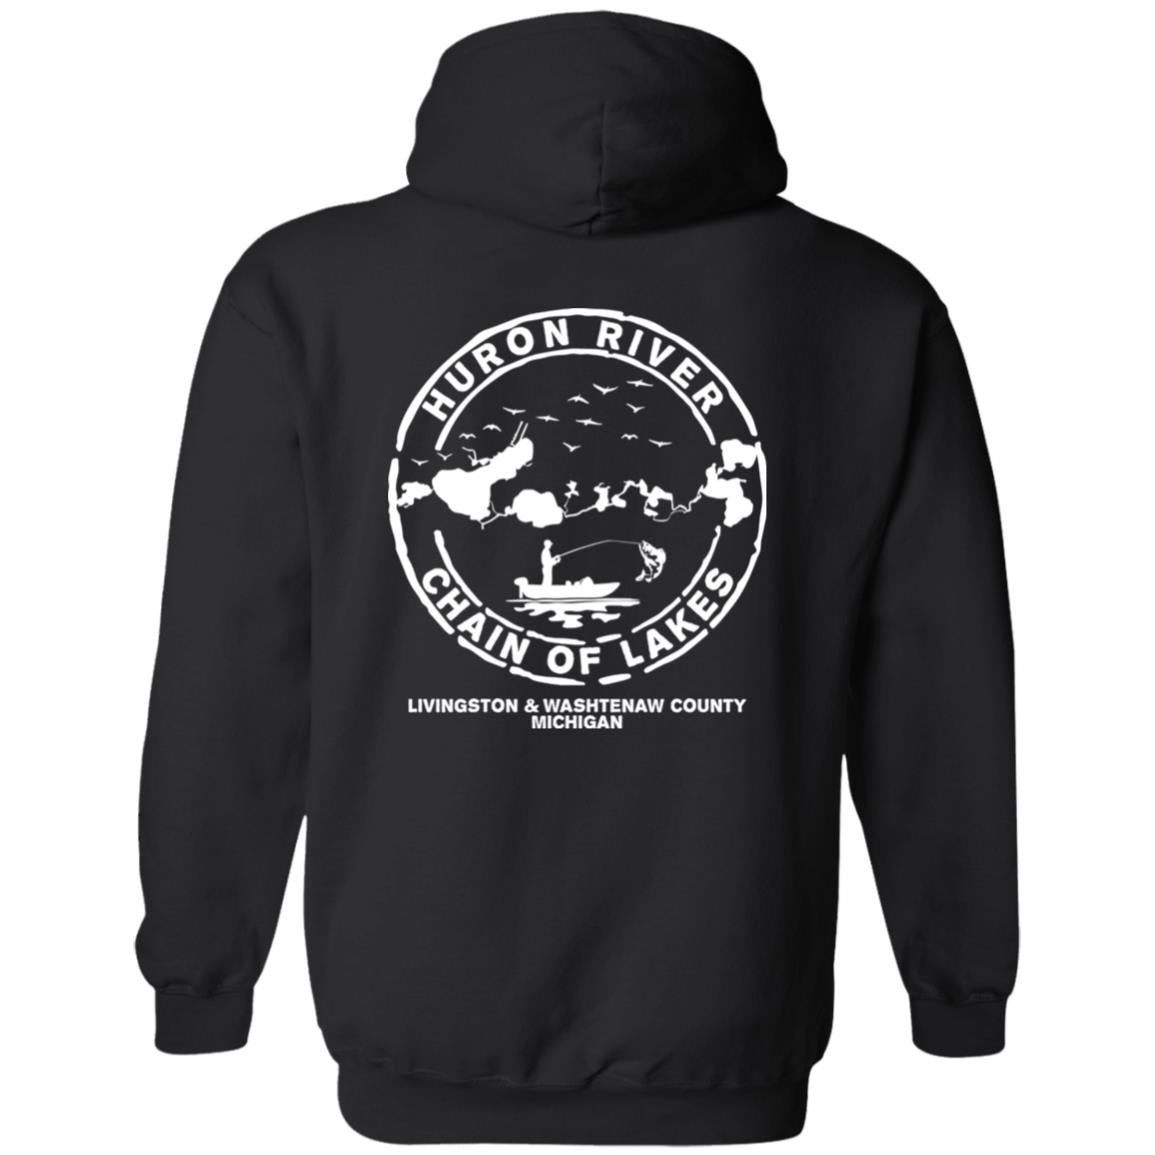 HRCL FL - Don't Be A Wanker - 2 Sided G185 Pullover Hoodie